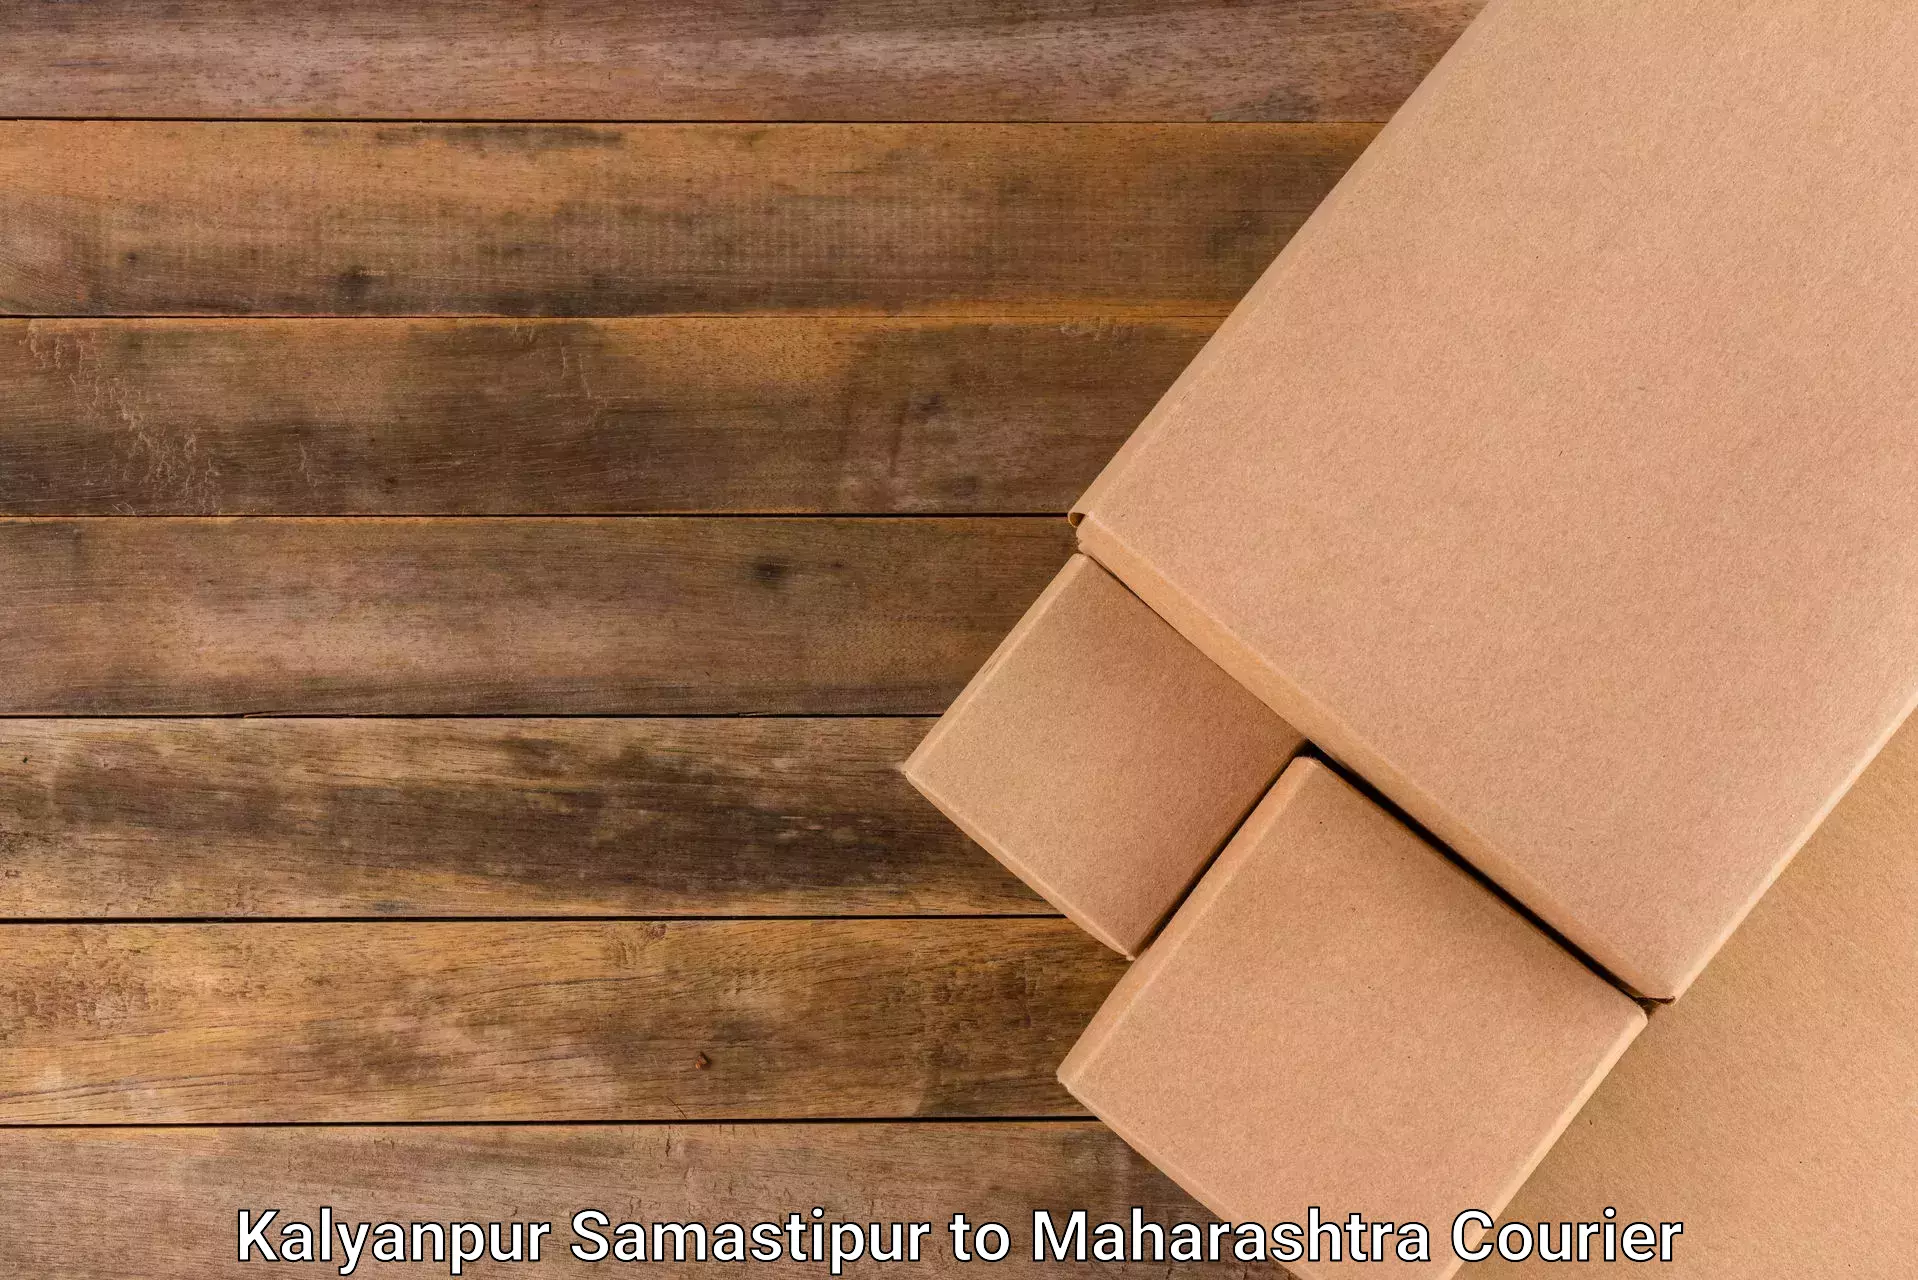 Business courier solutions Kalyanpur Samastipur to Khed